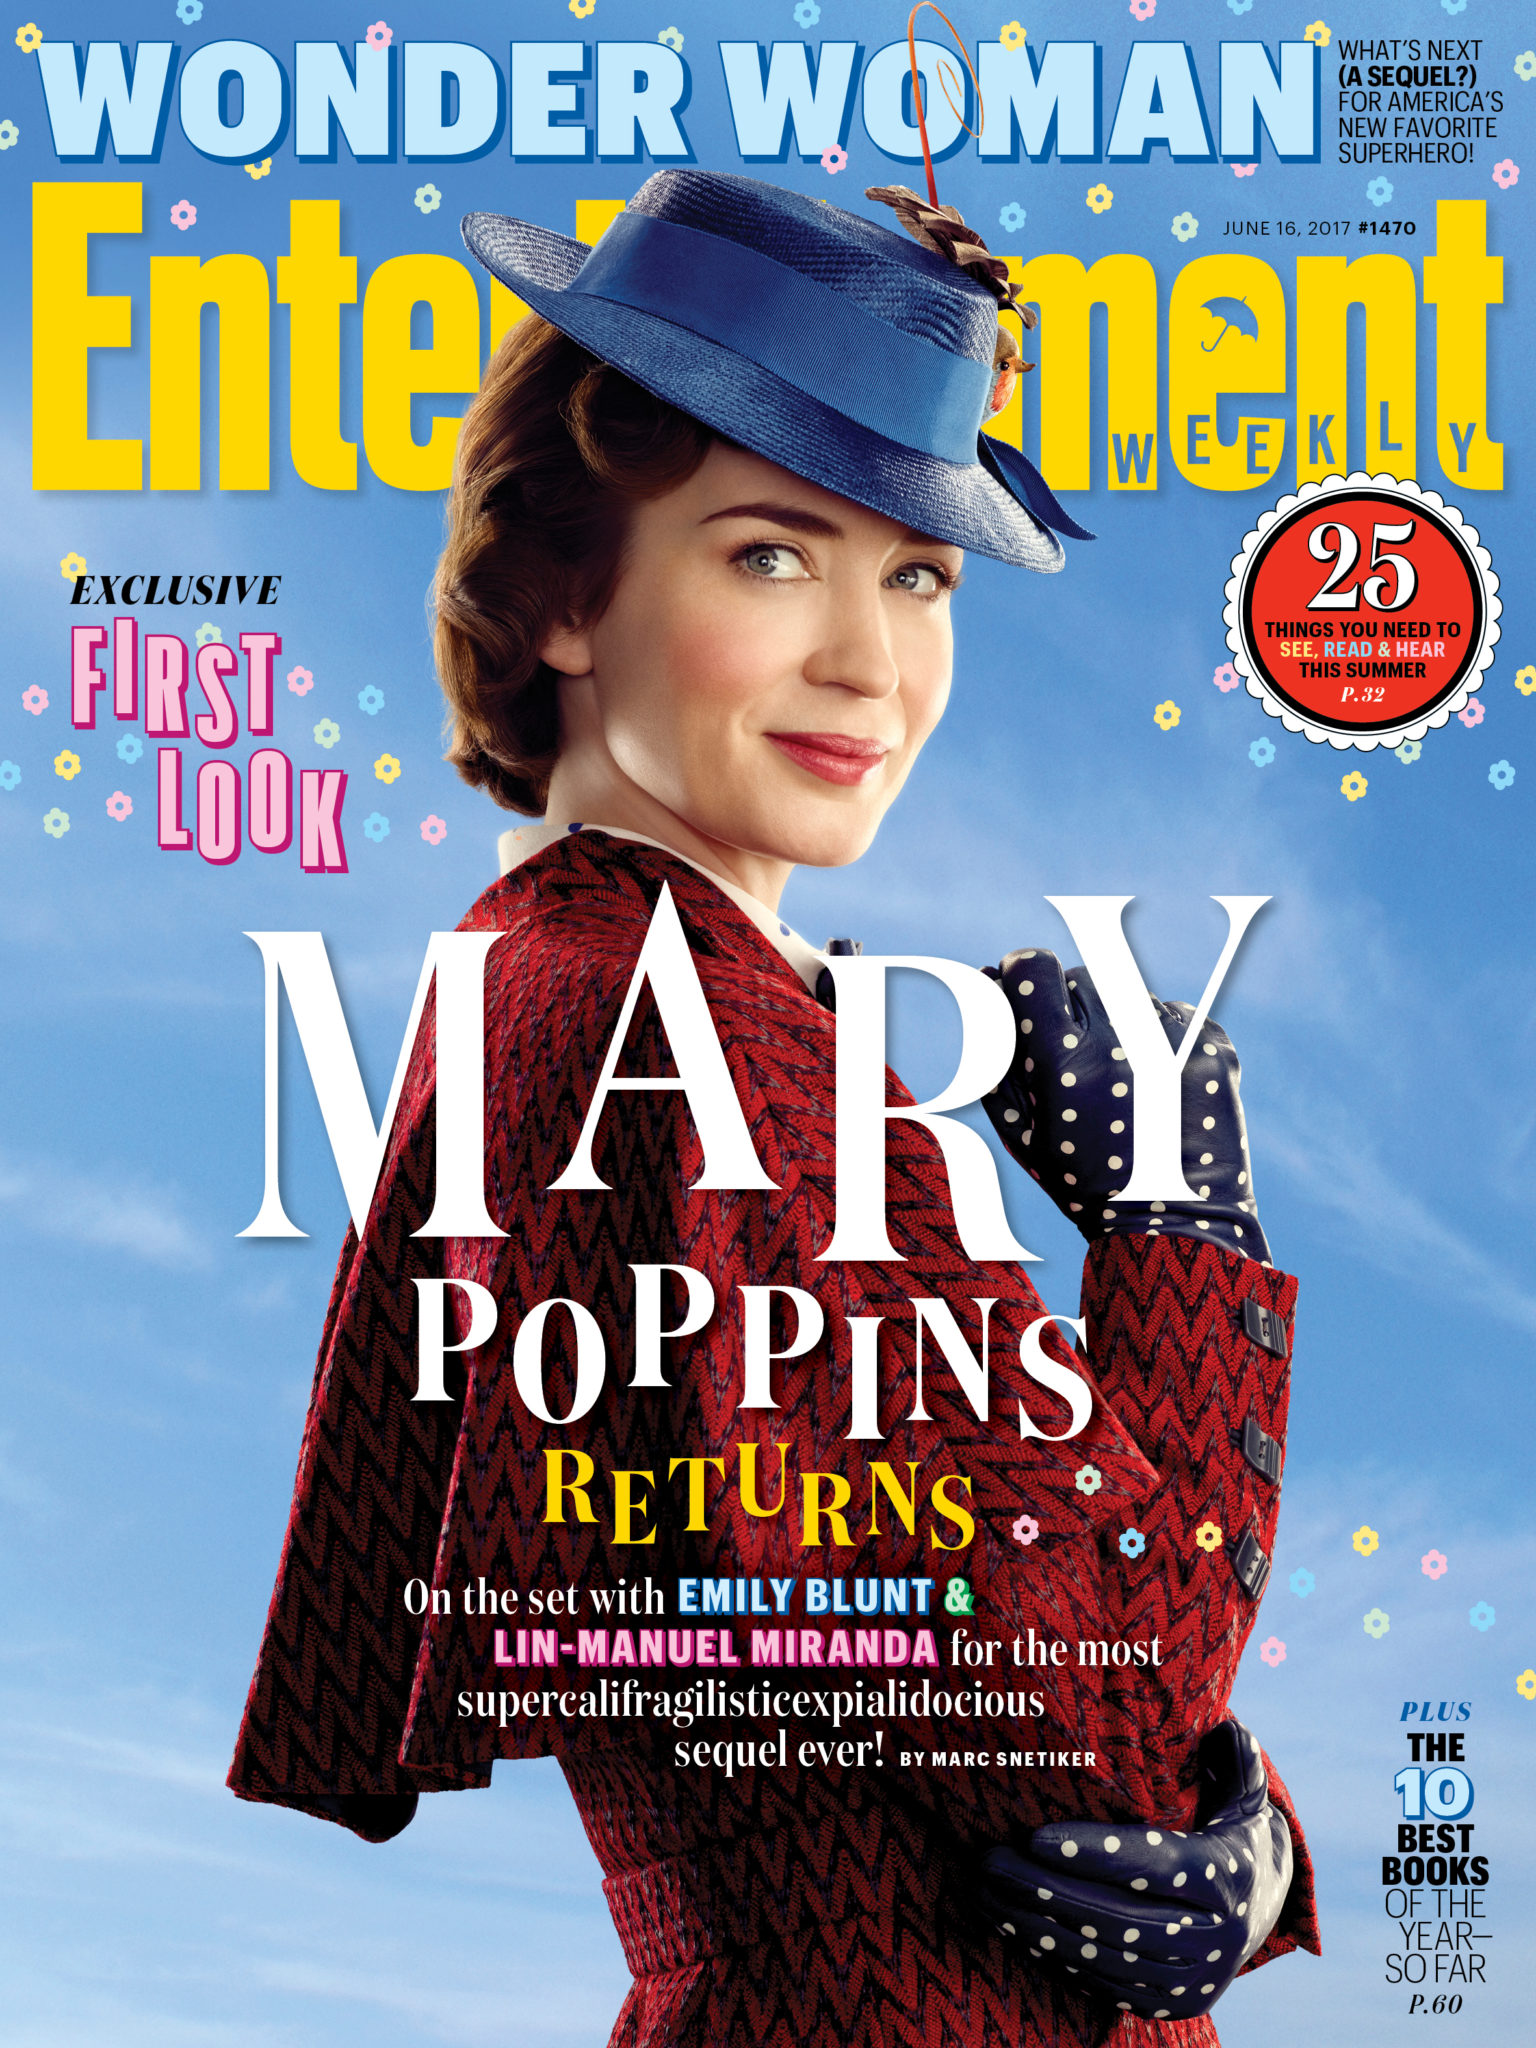 Our First Look Into Disney’s Next Live Action Movie: ‘Mary Poppins Returns’